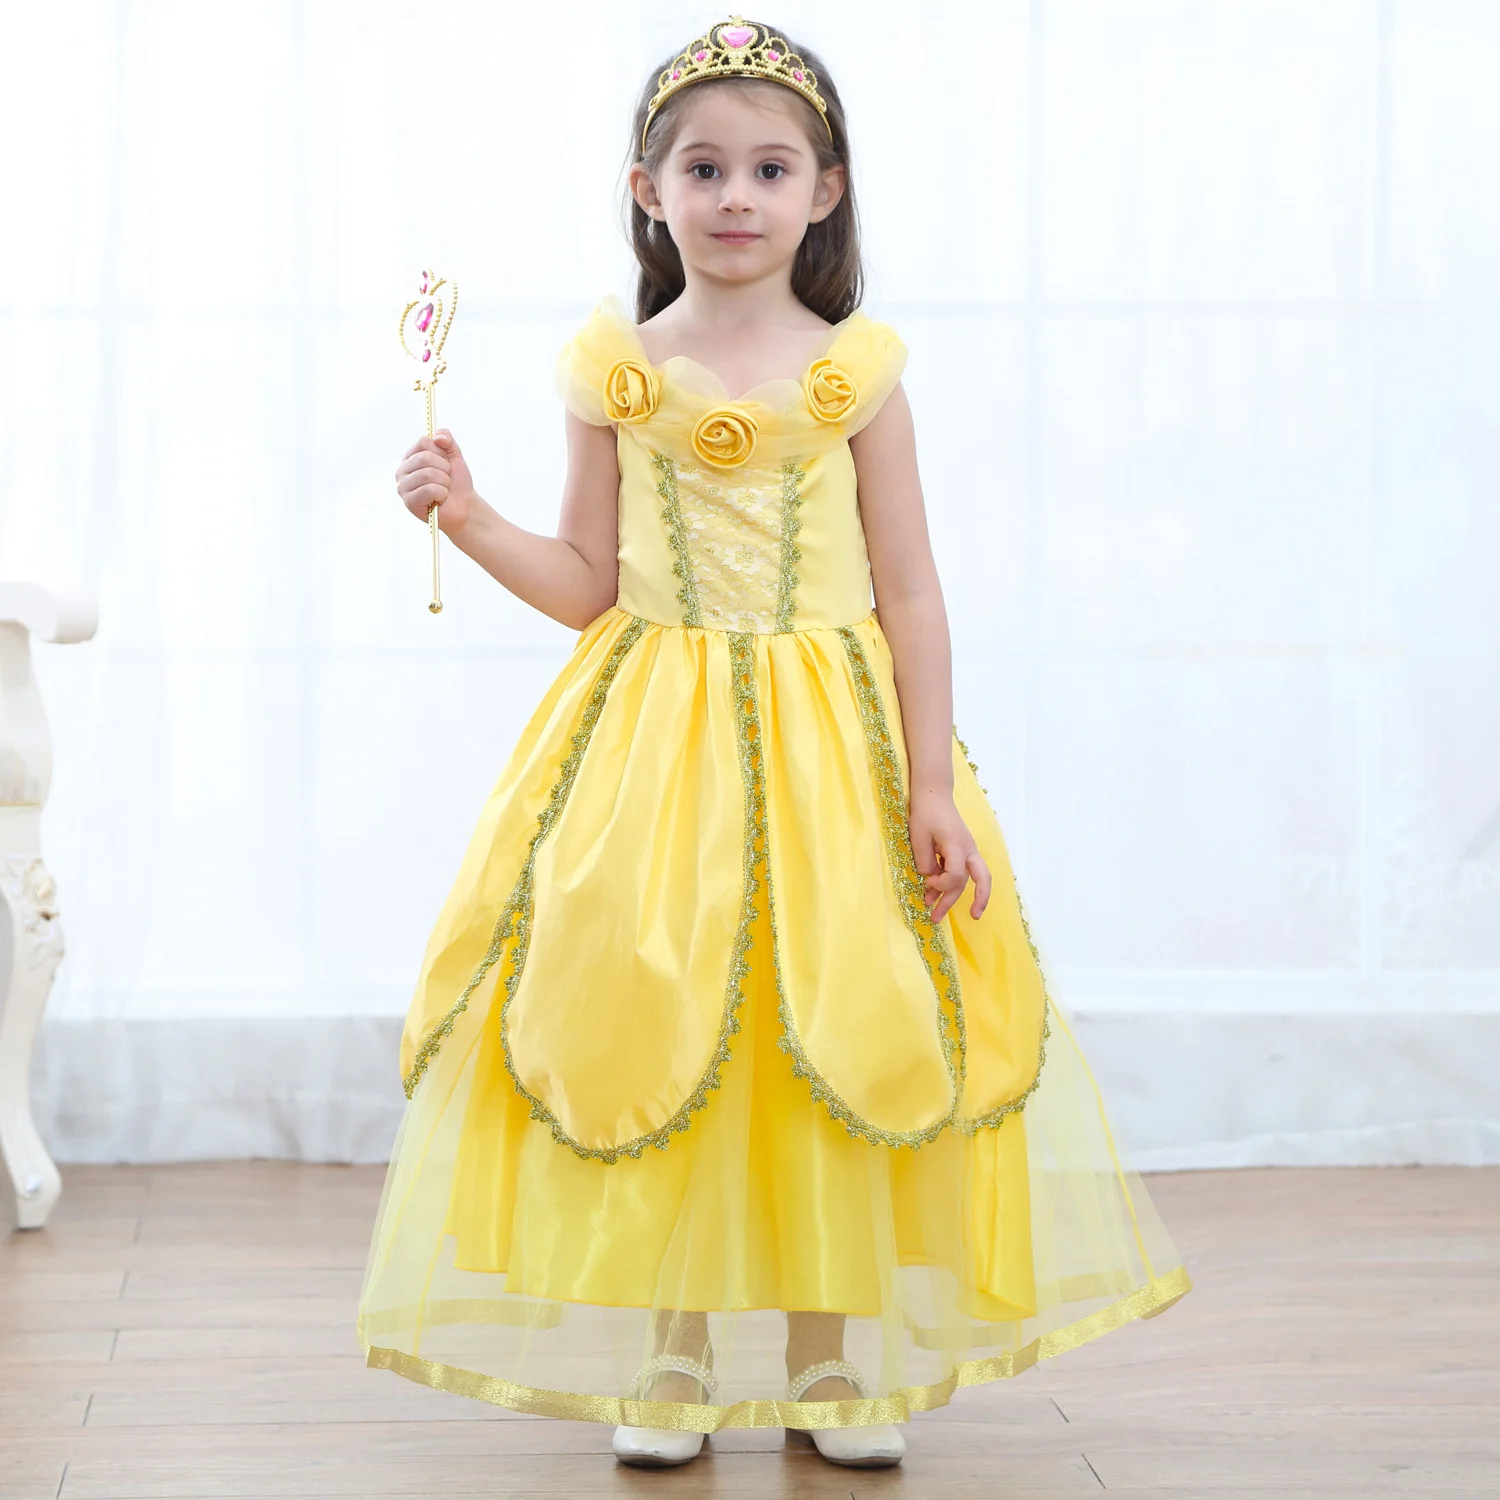 

Princess Yellow Dress Up Costume for Girls Birthday Party Carnival Cosplay Fancy Cute Belle Frocks Child Role Play Evening Gown